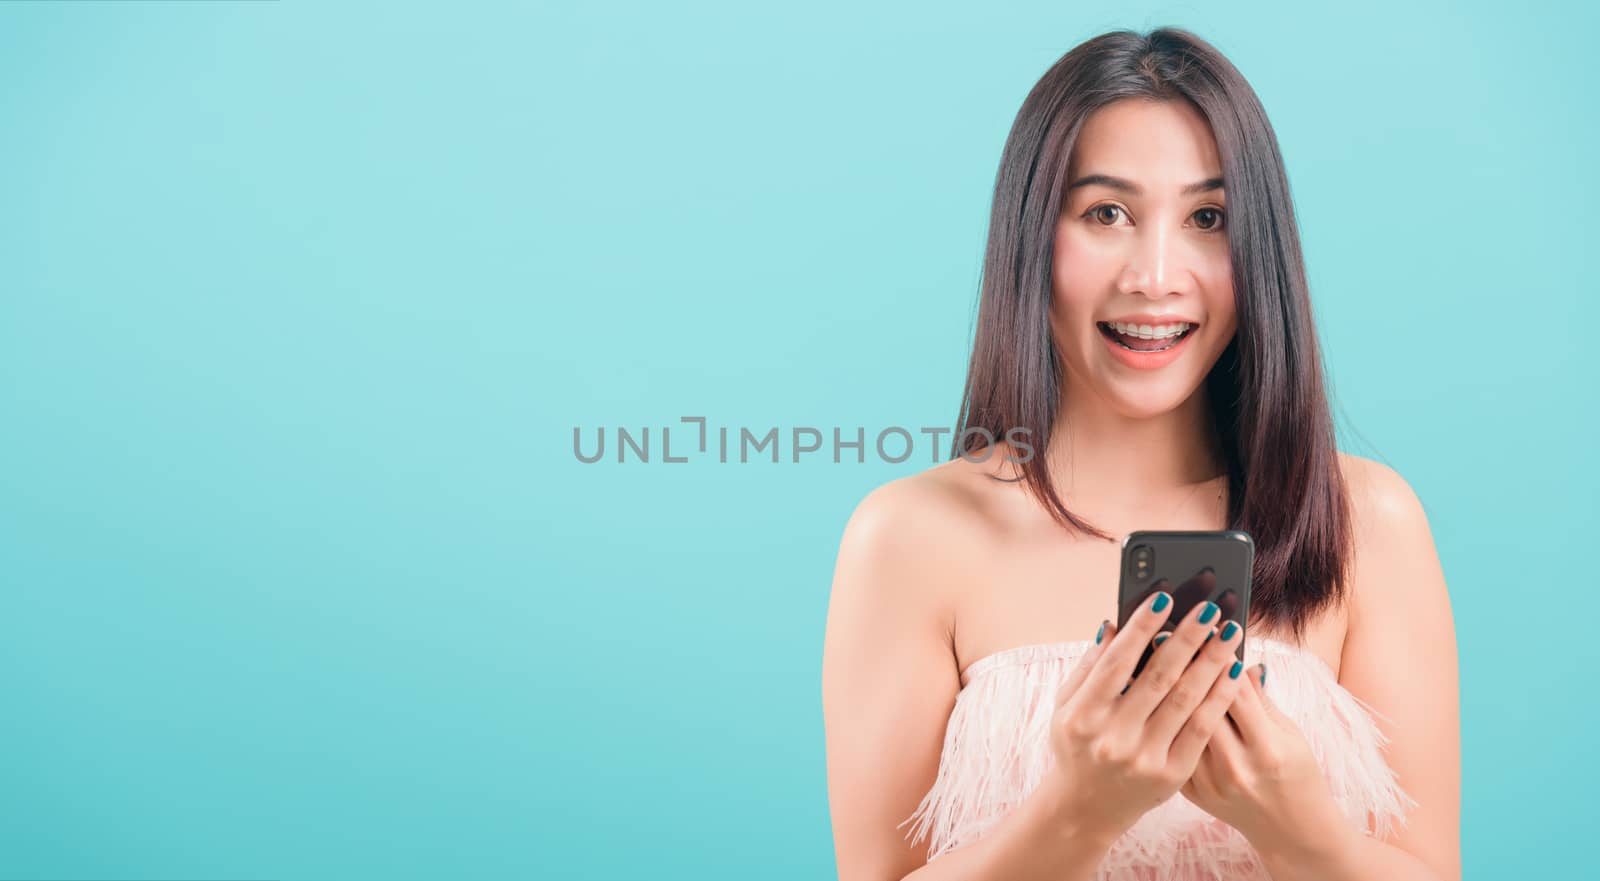 woman standing smile her  holding smartphone or mobile phone by Sorapop